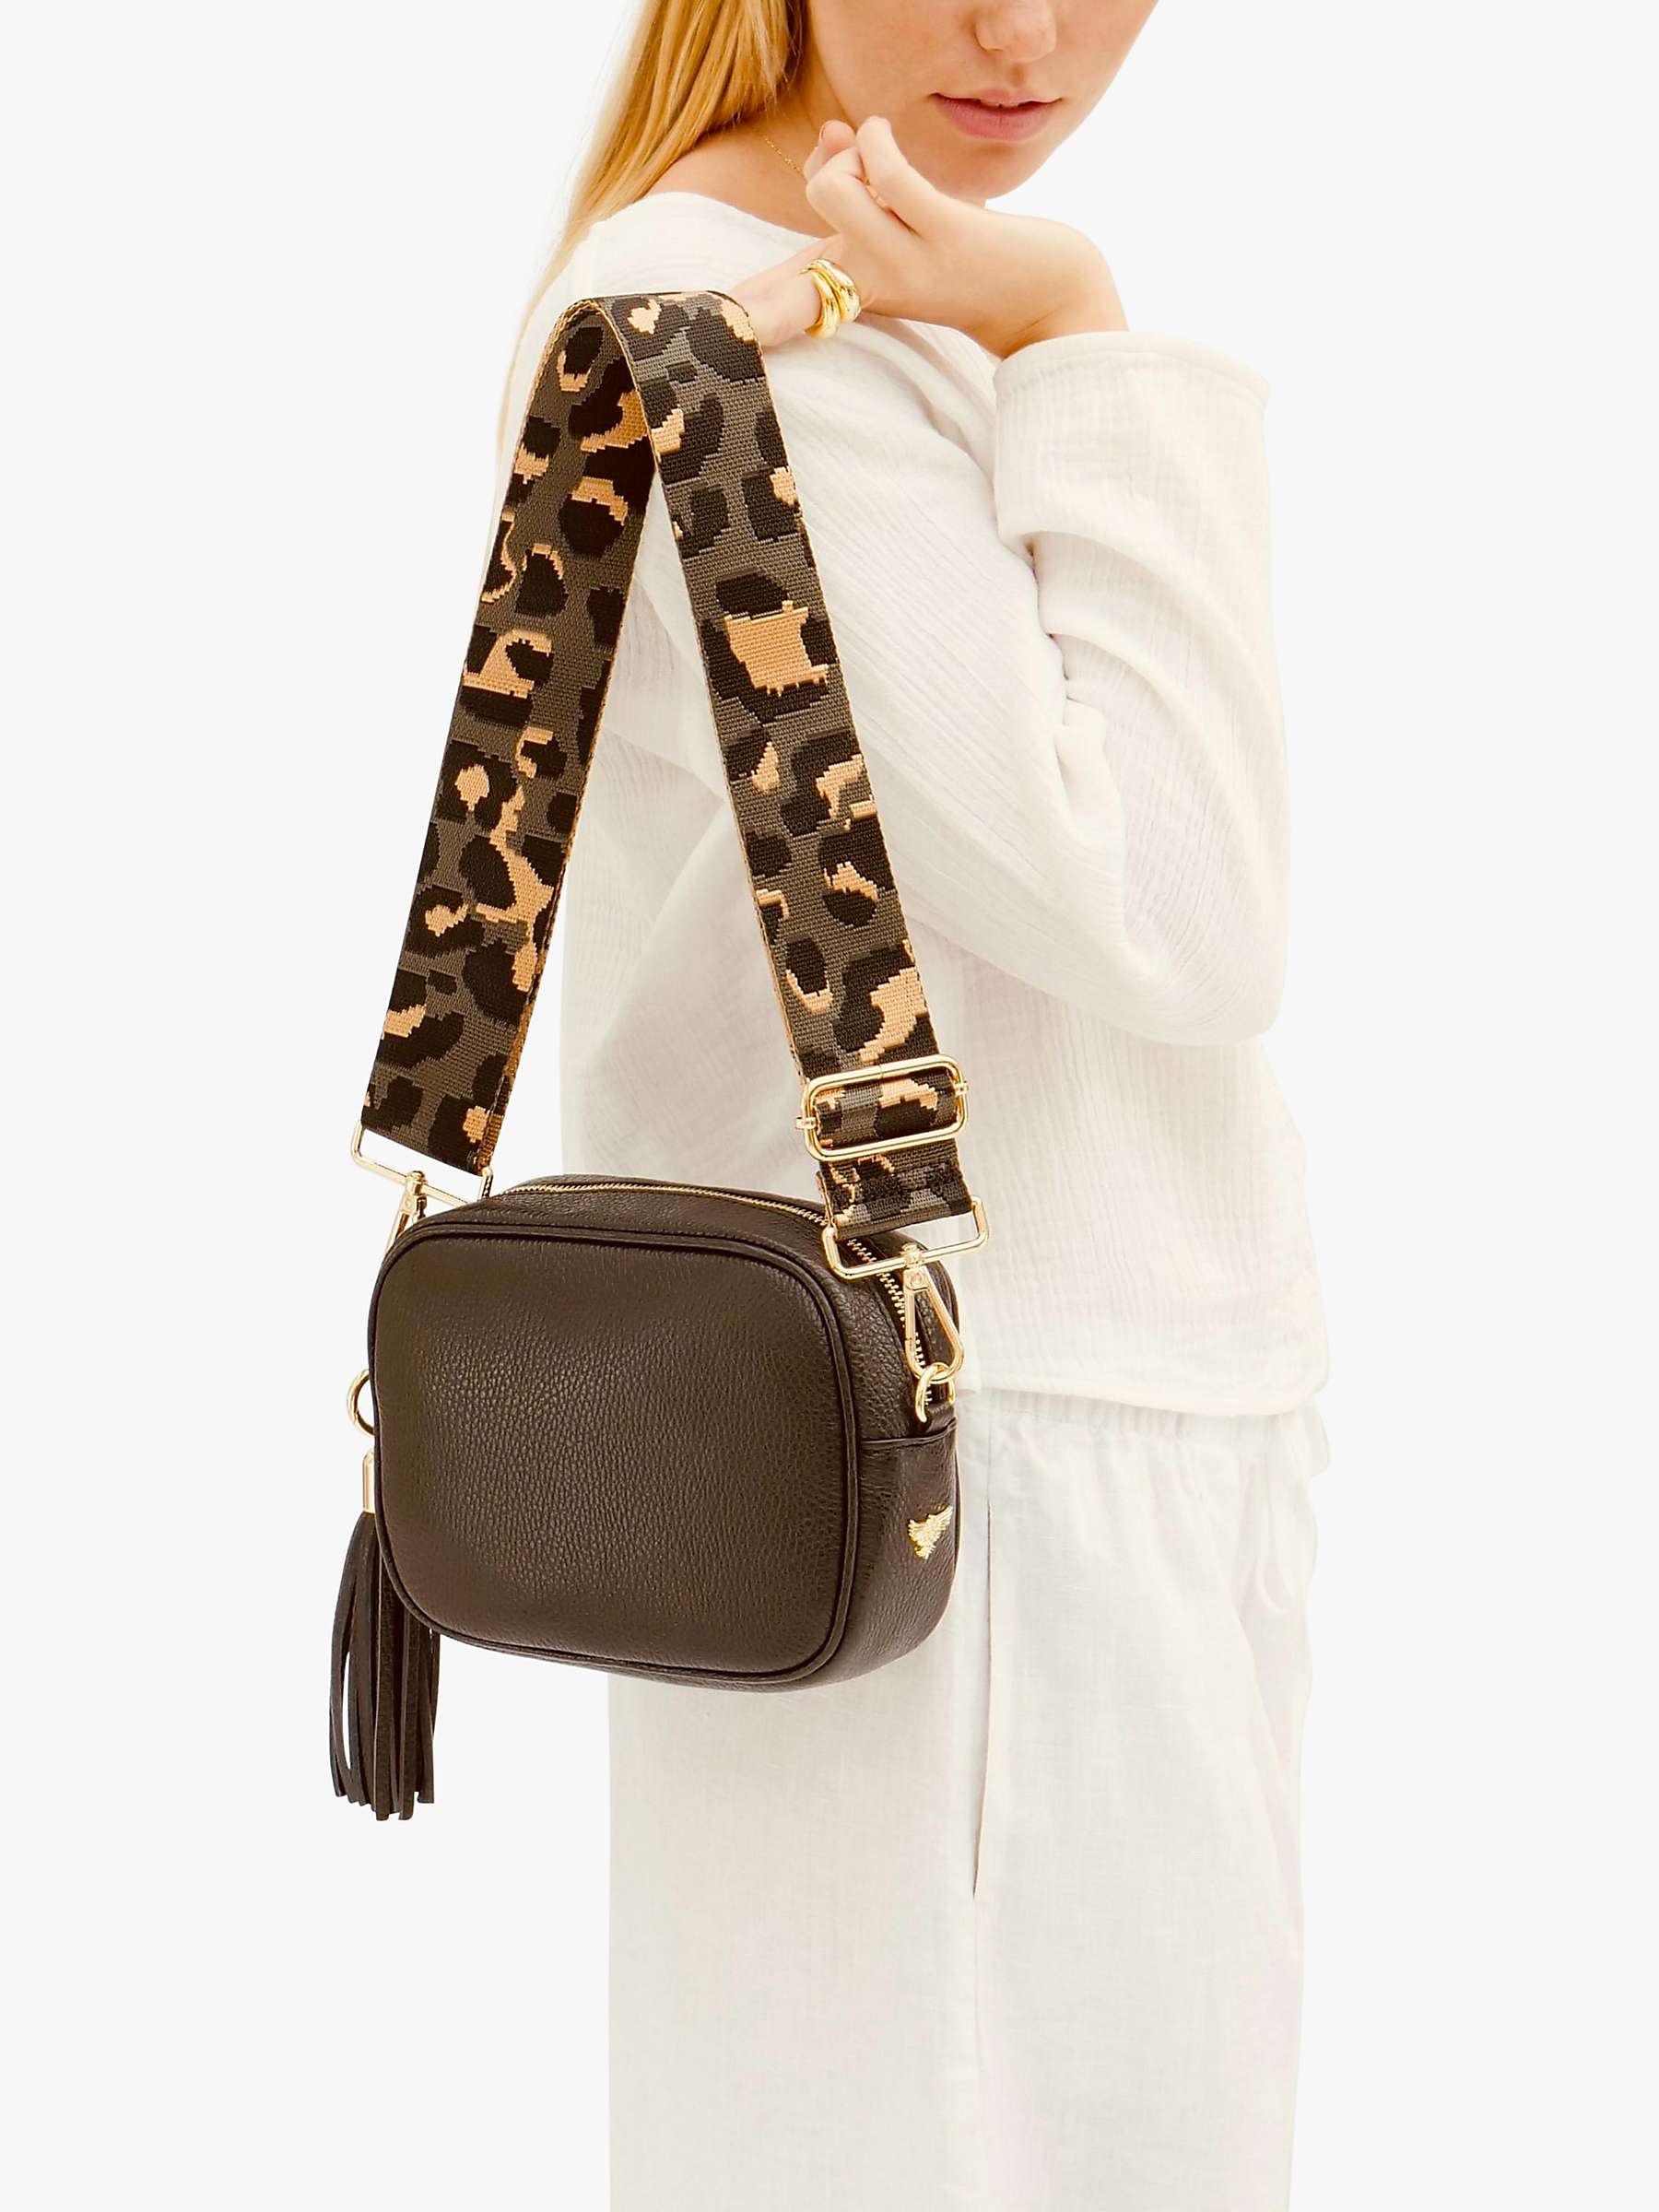 Buy Apatchy Leopard Print Strap Leather Cross Body Bag Online at johnlewis.com